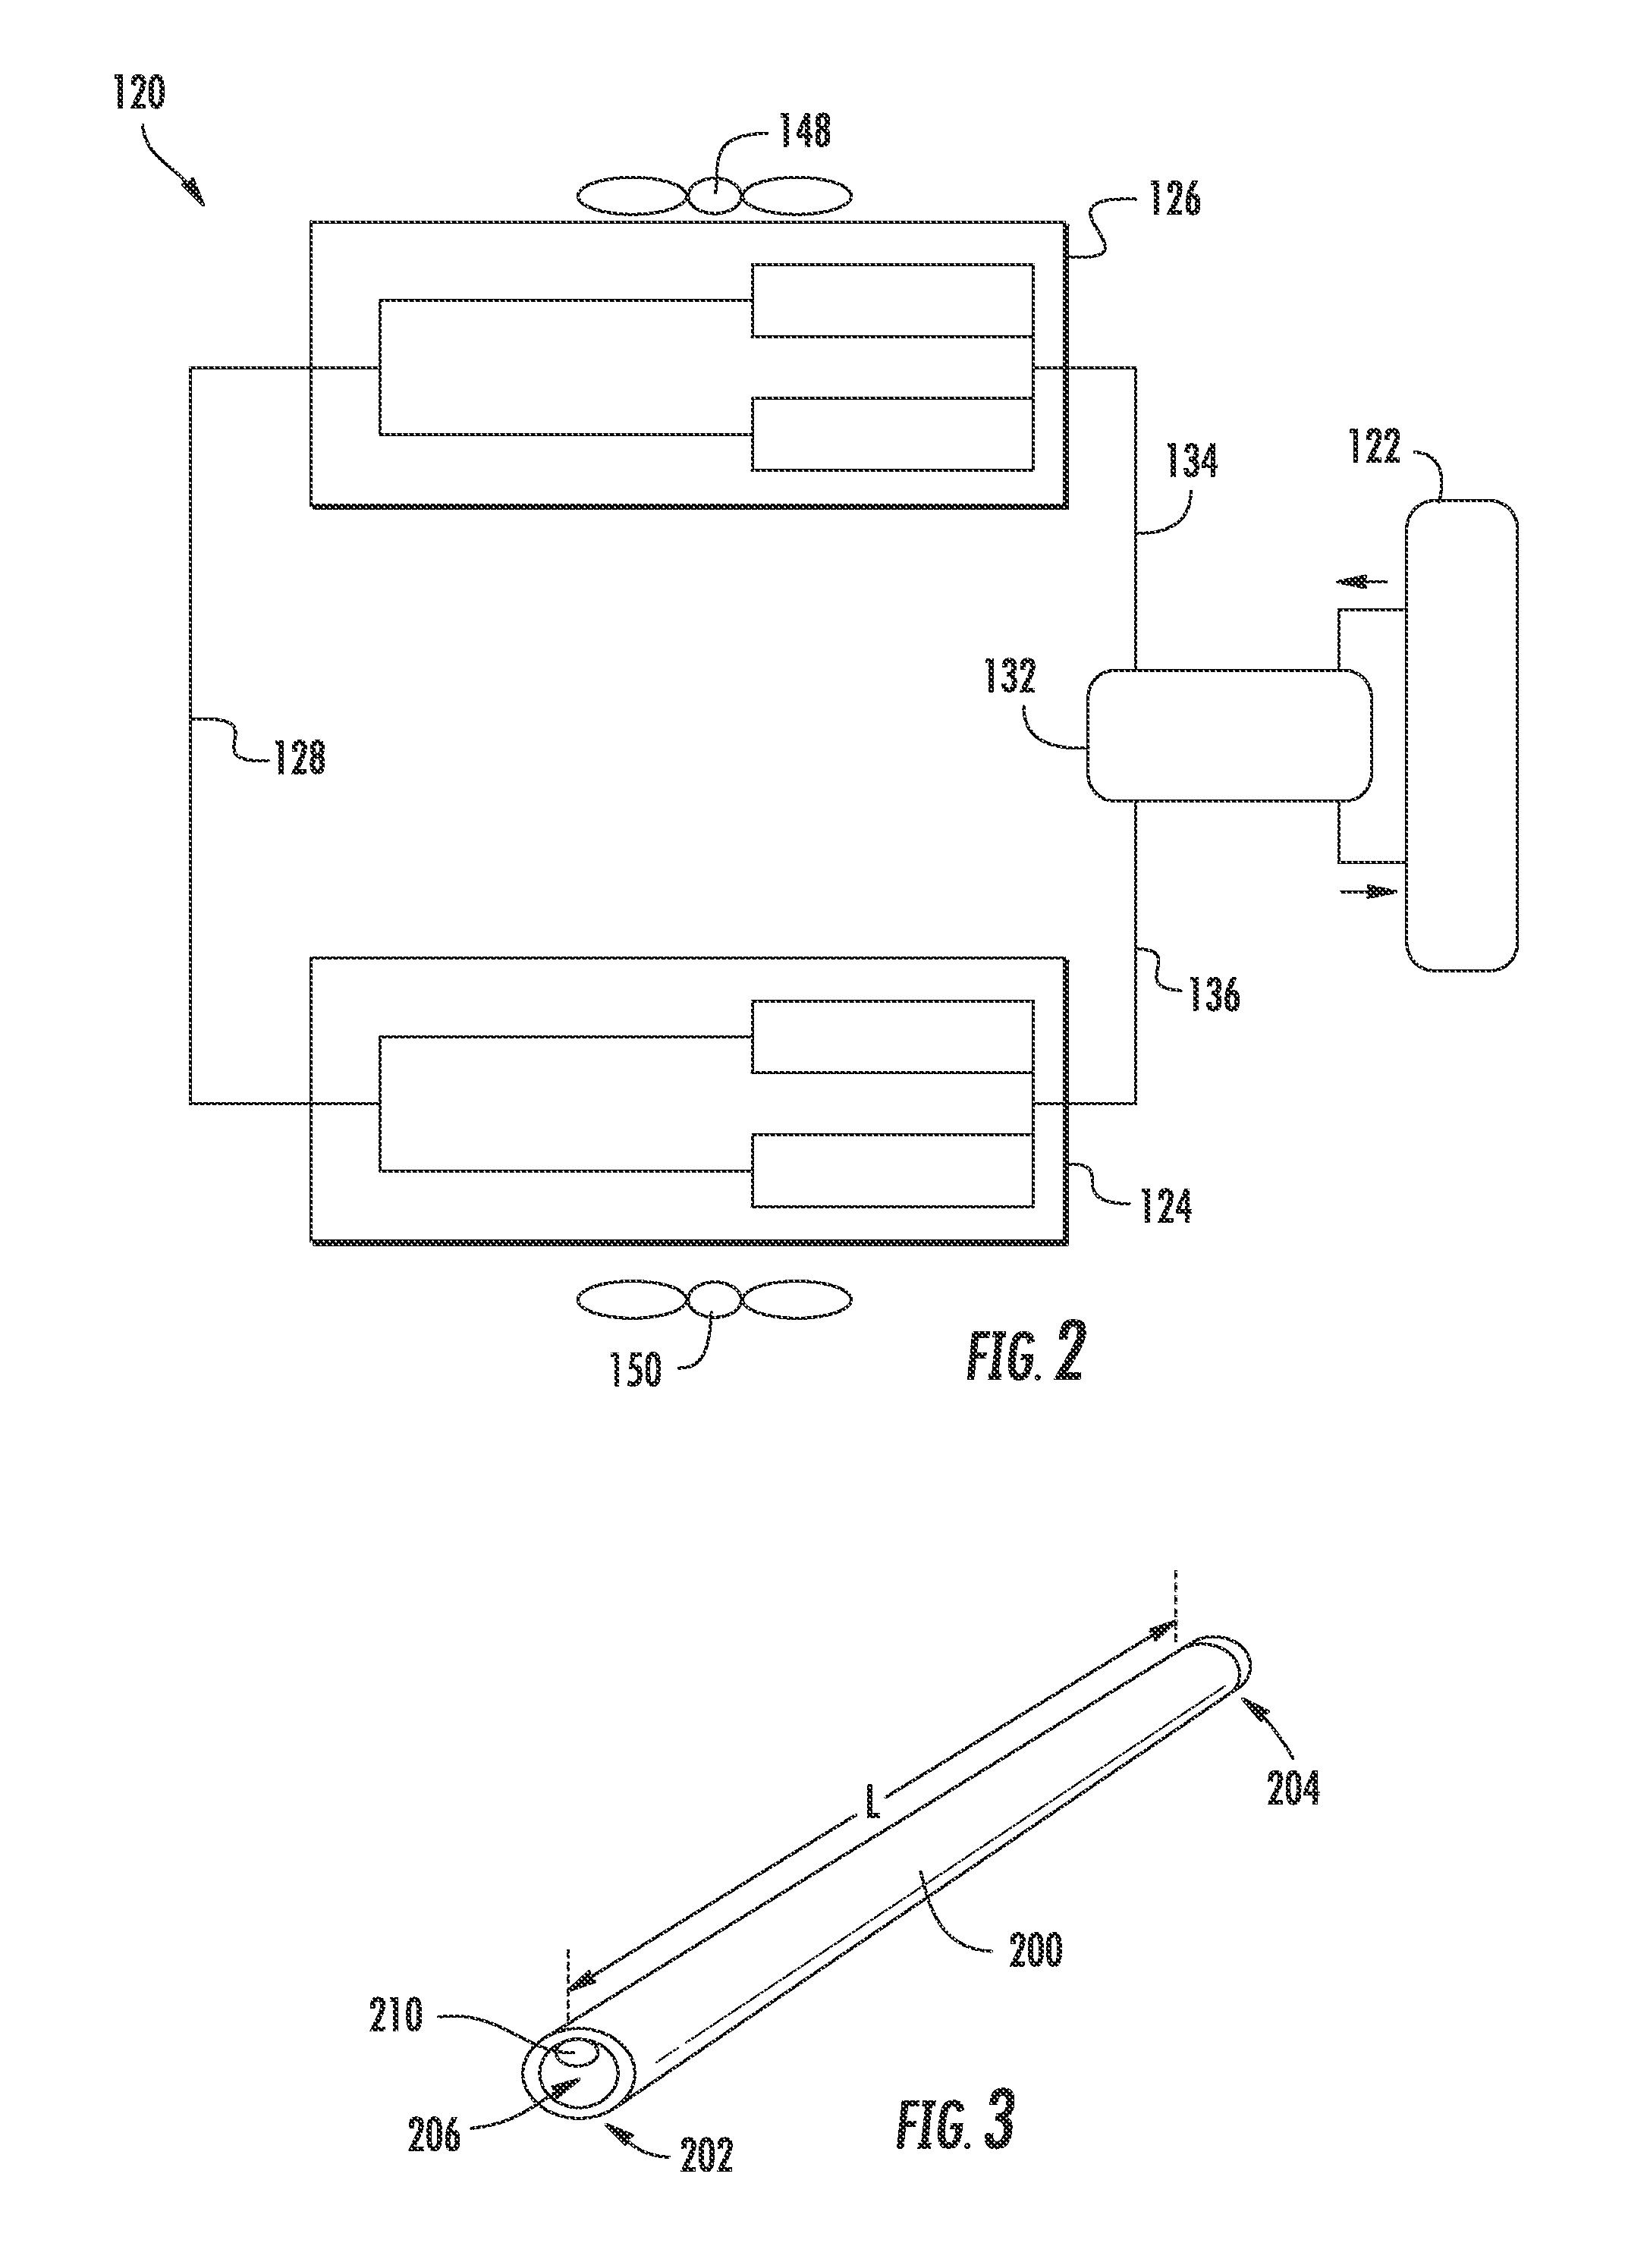 Capillary tube for a packaged terminal air conditioner unit